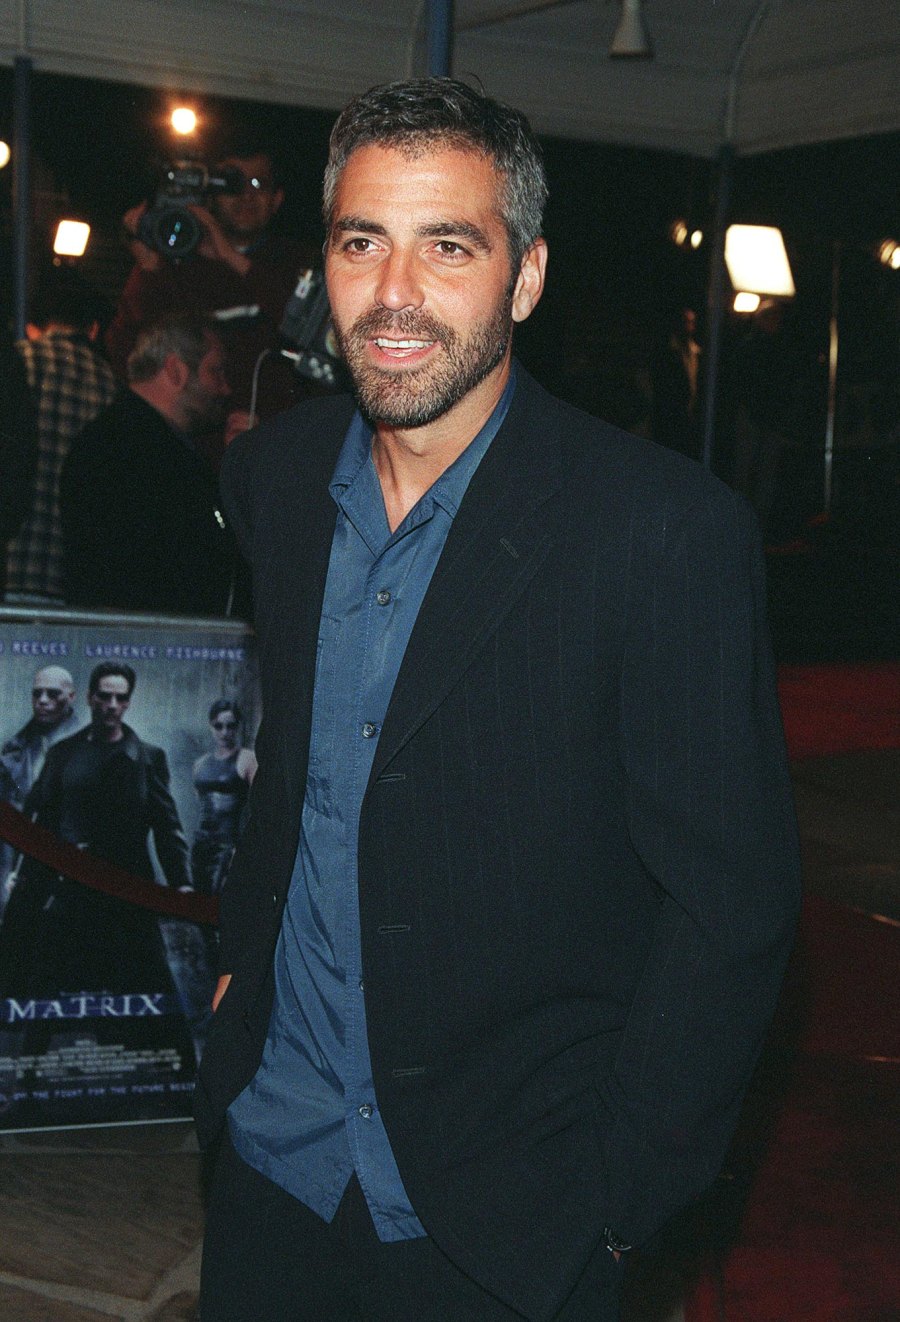 TK Wild Photos From The Matrix Premiere in 1999 494 George Clooney